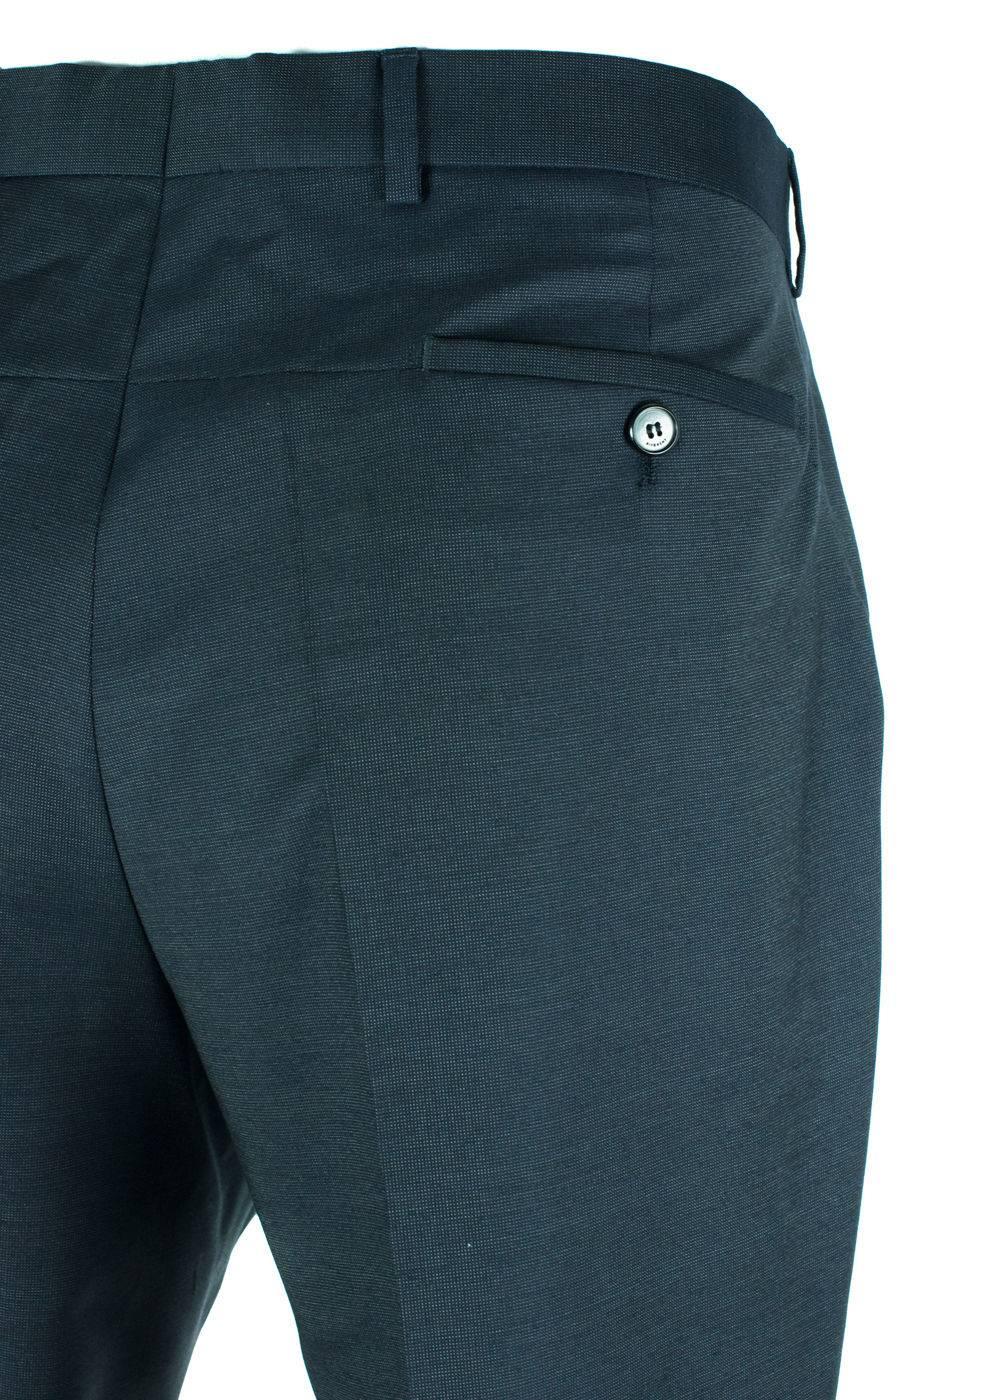 Givenchy Men's Classic Wool Blend Black Trousers  In New Condition For Sale In Brooklyn, NY